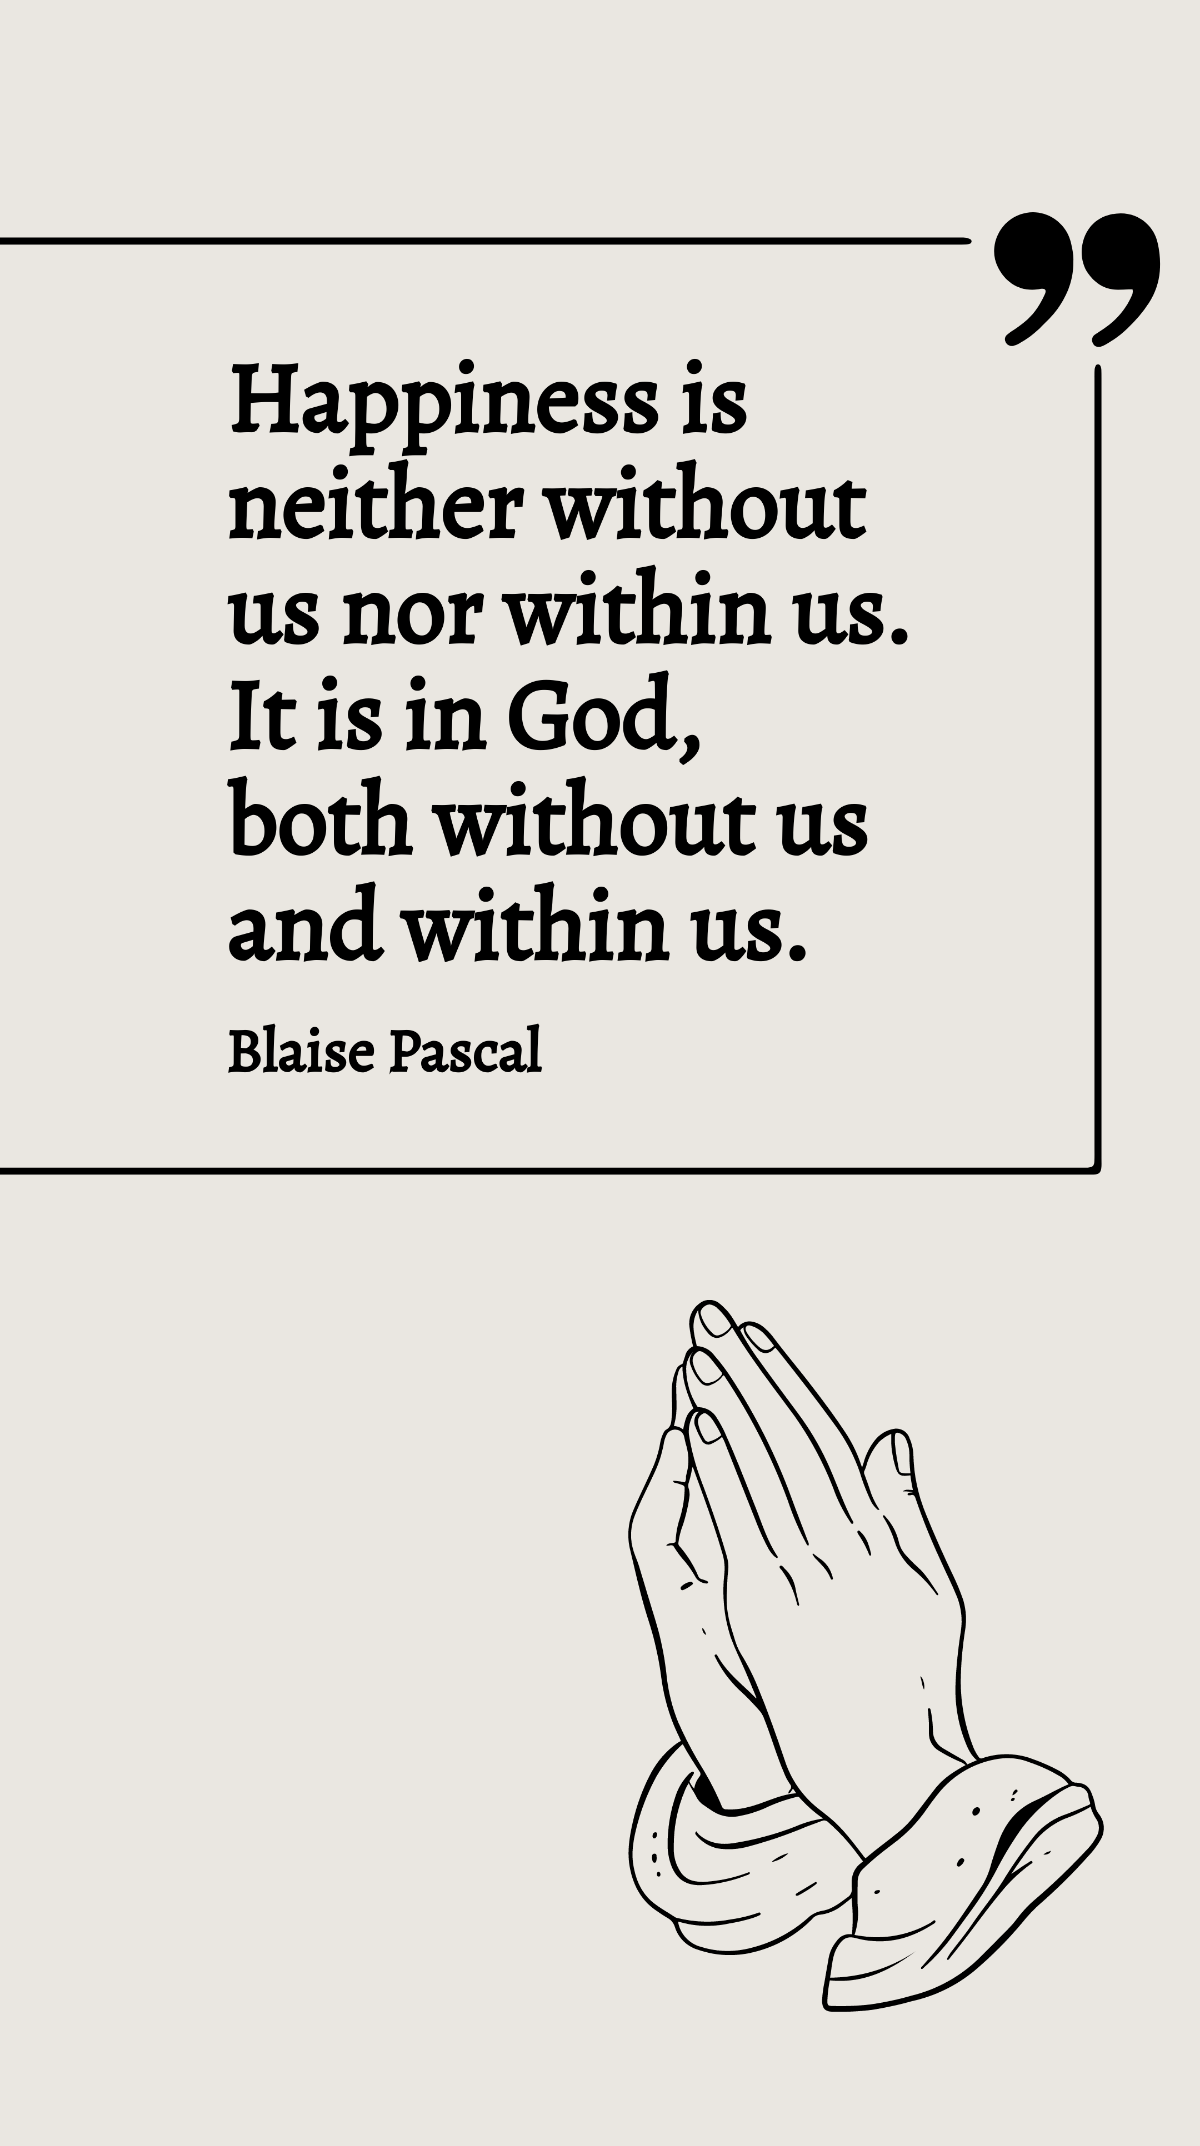 Blaise Pascal - Happiness is neither without us nor within us. It is in God, both without us and within us. Template